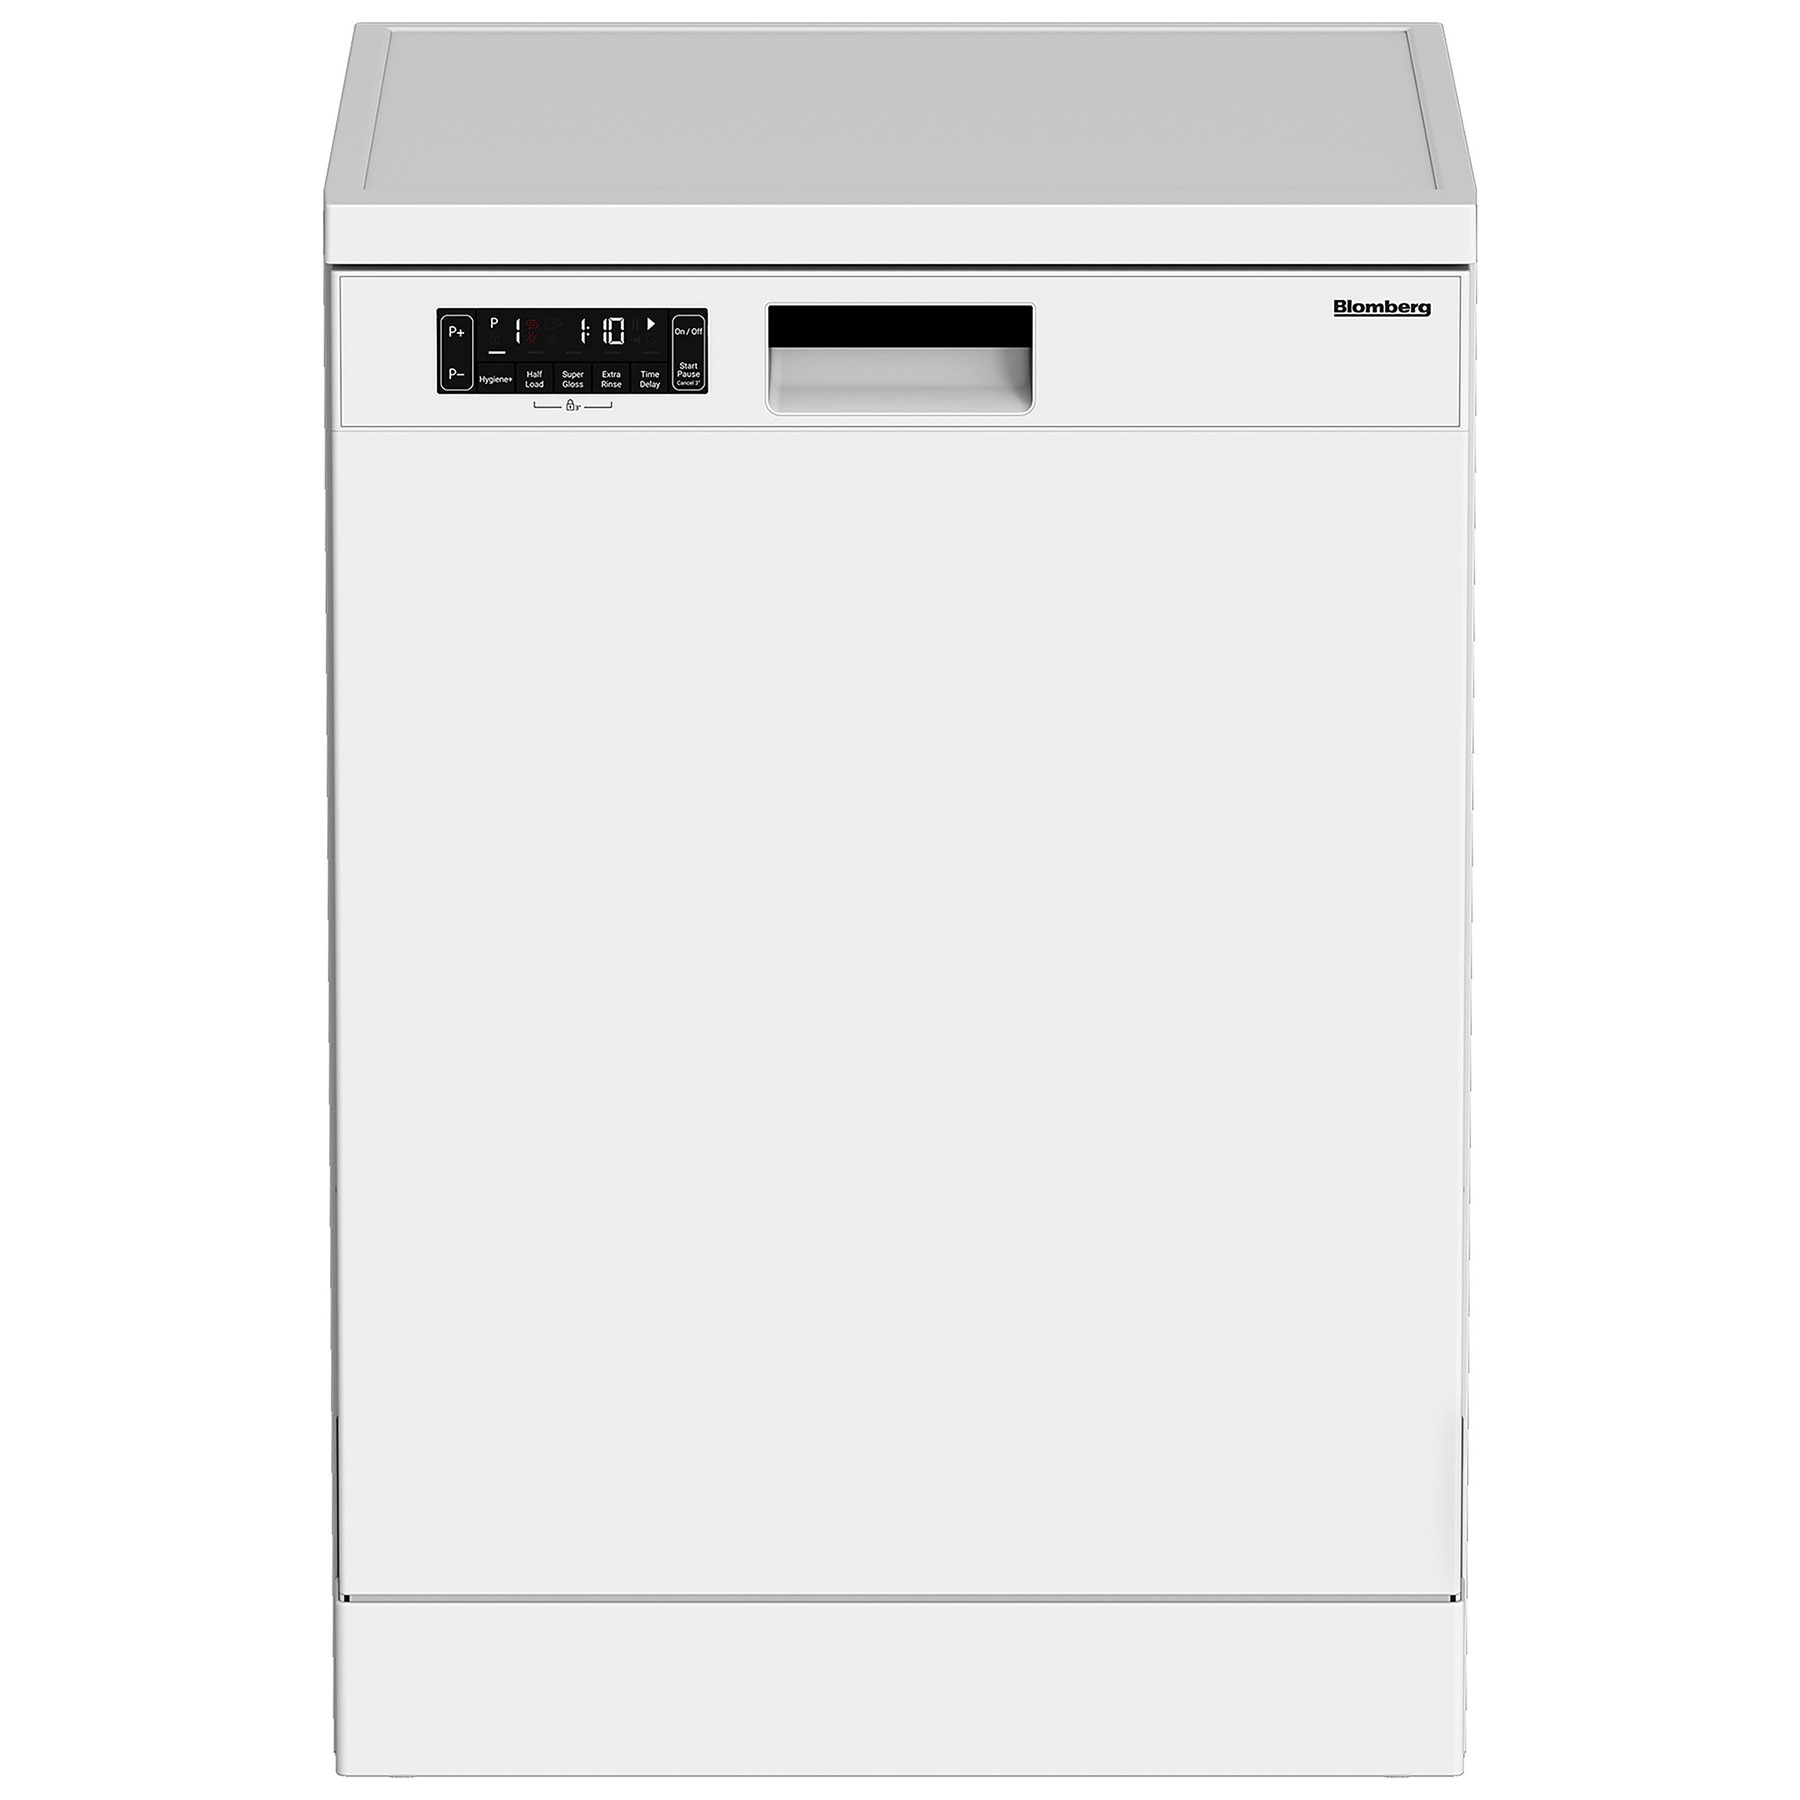 Image of Blomberg LDF52320W 60cm Dishwasher White 15 Place Setting D Rated 3YG